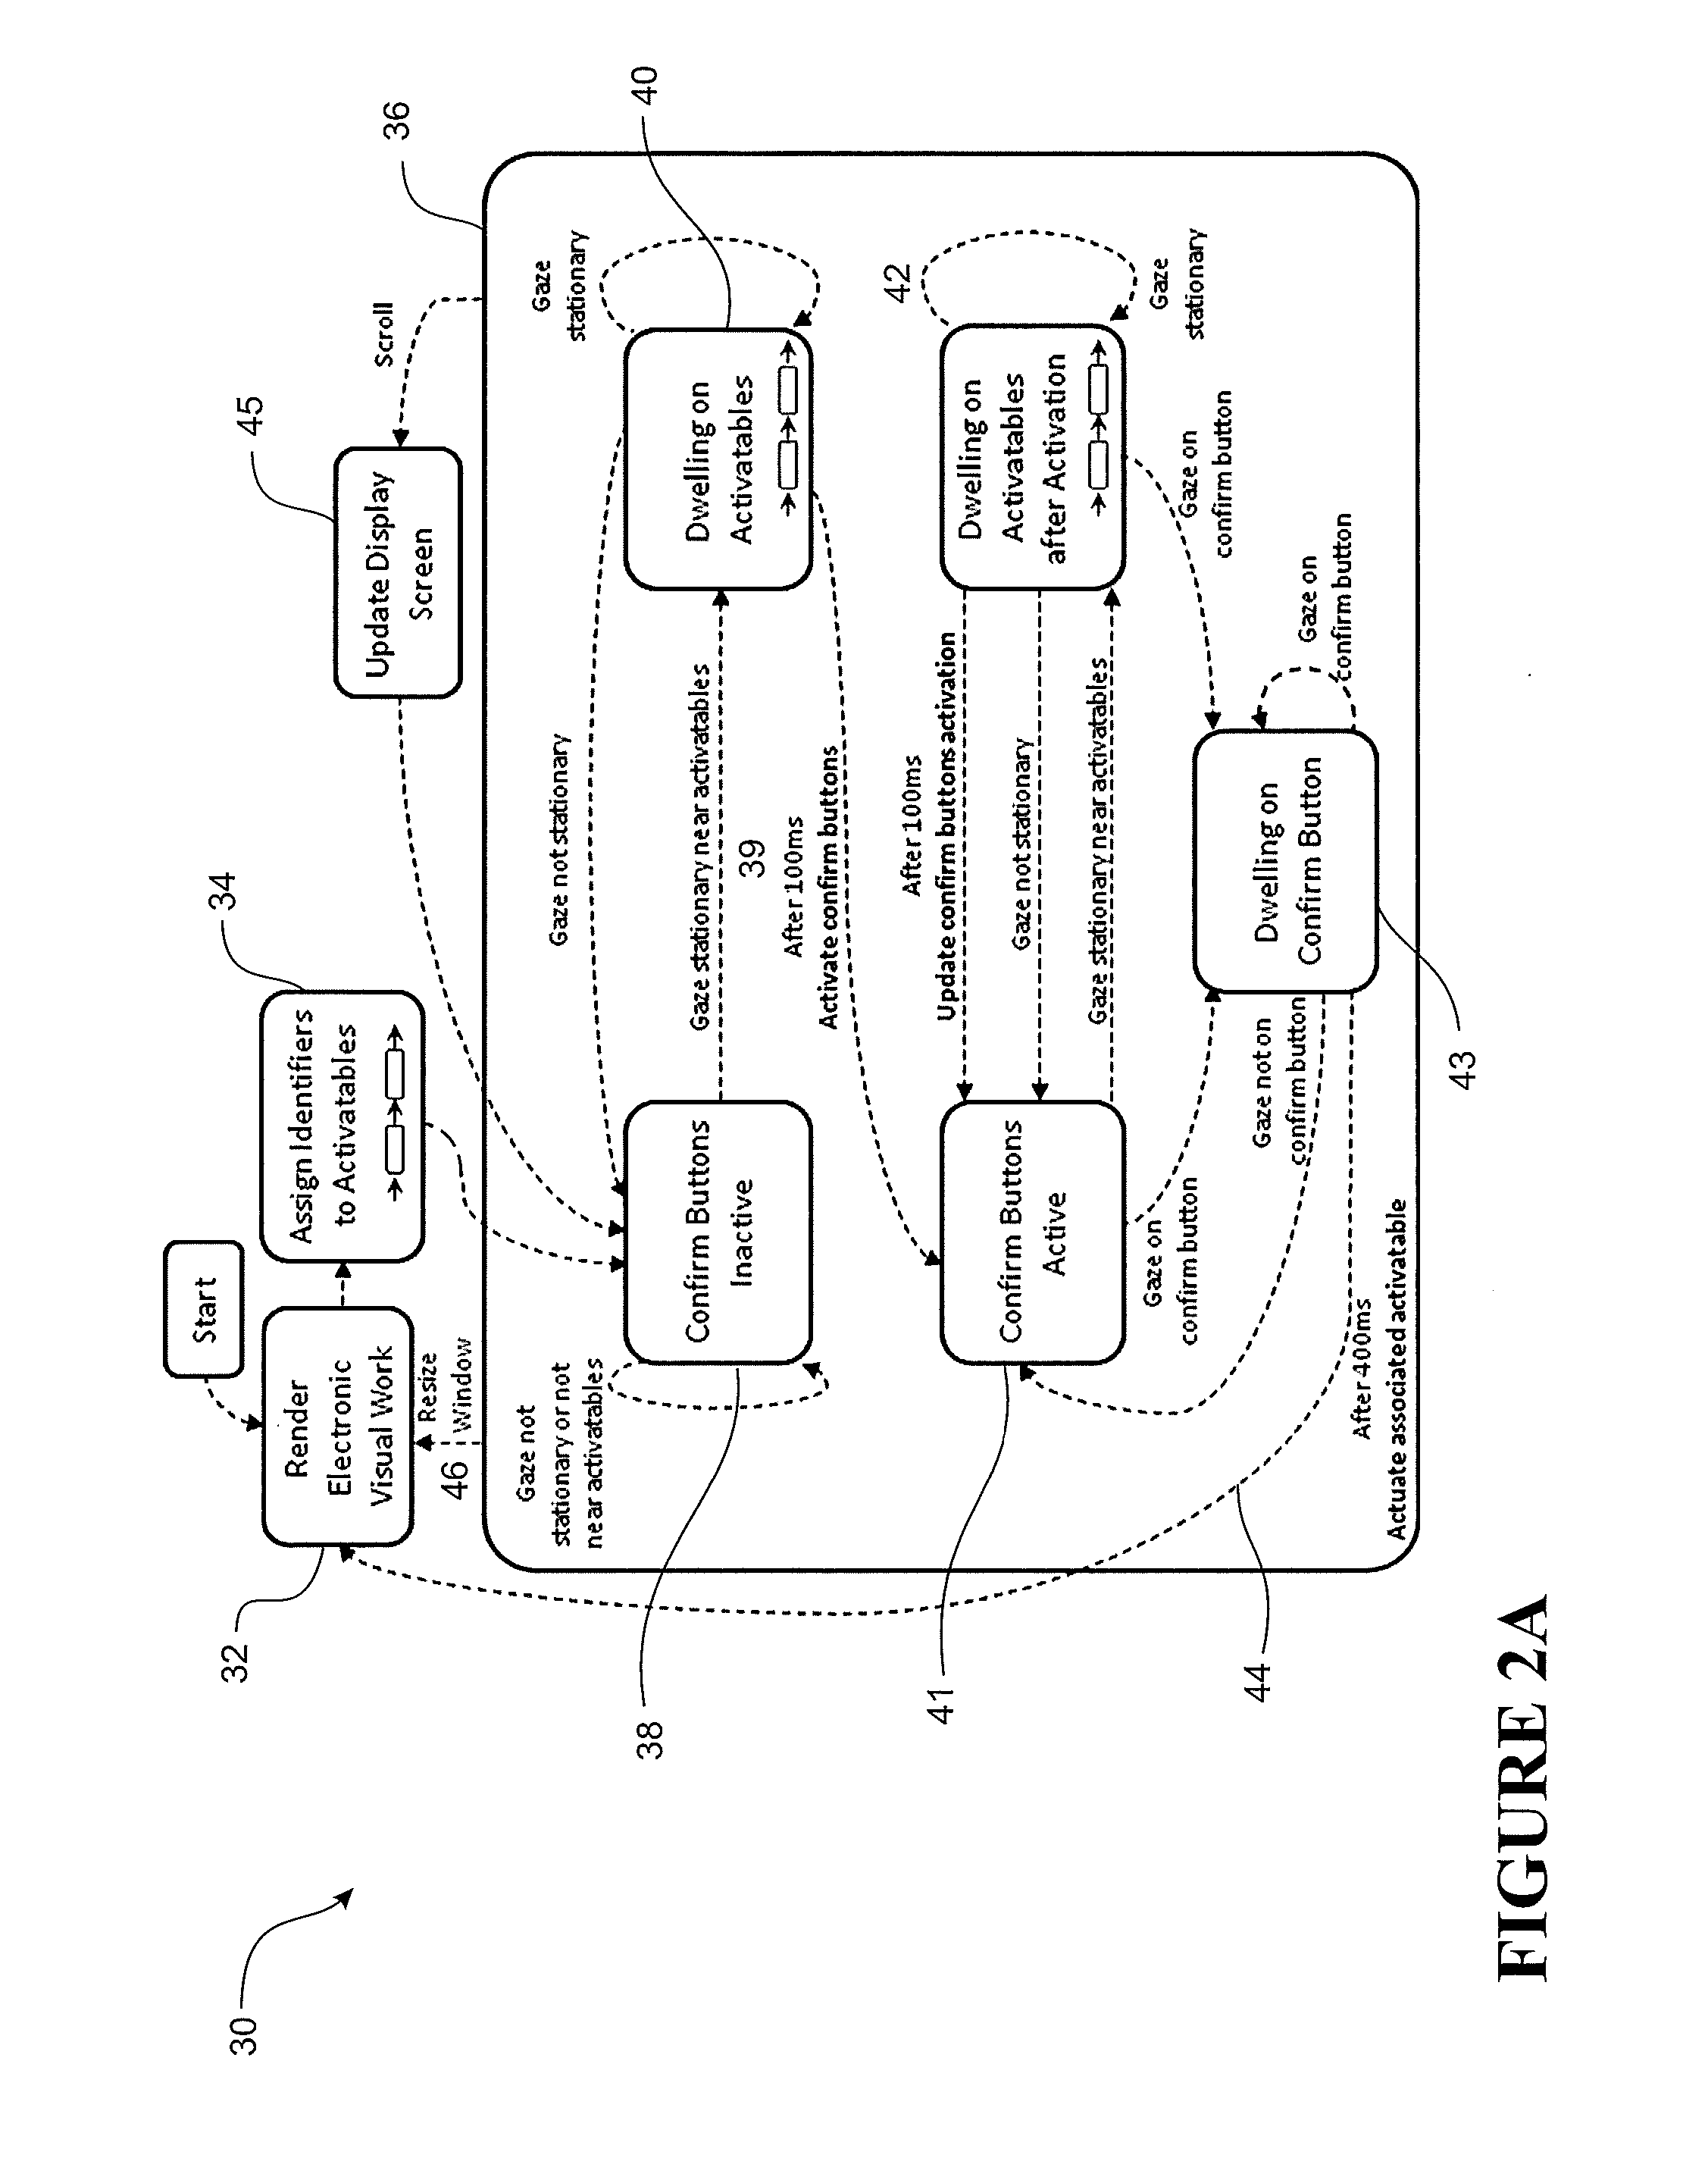 Gaze-controlled interface method and system